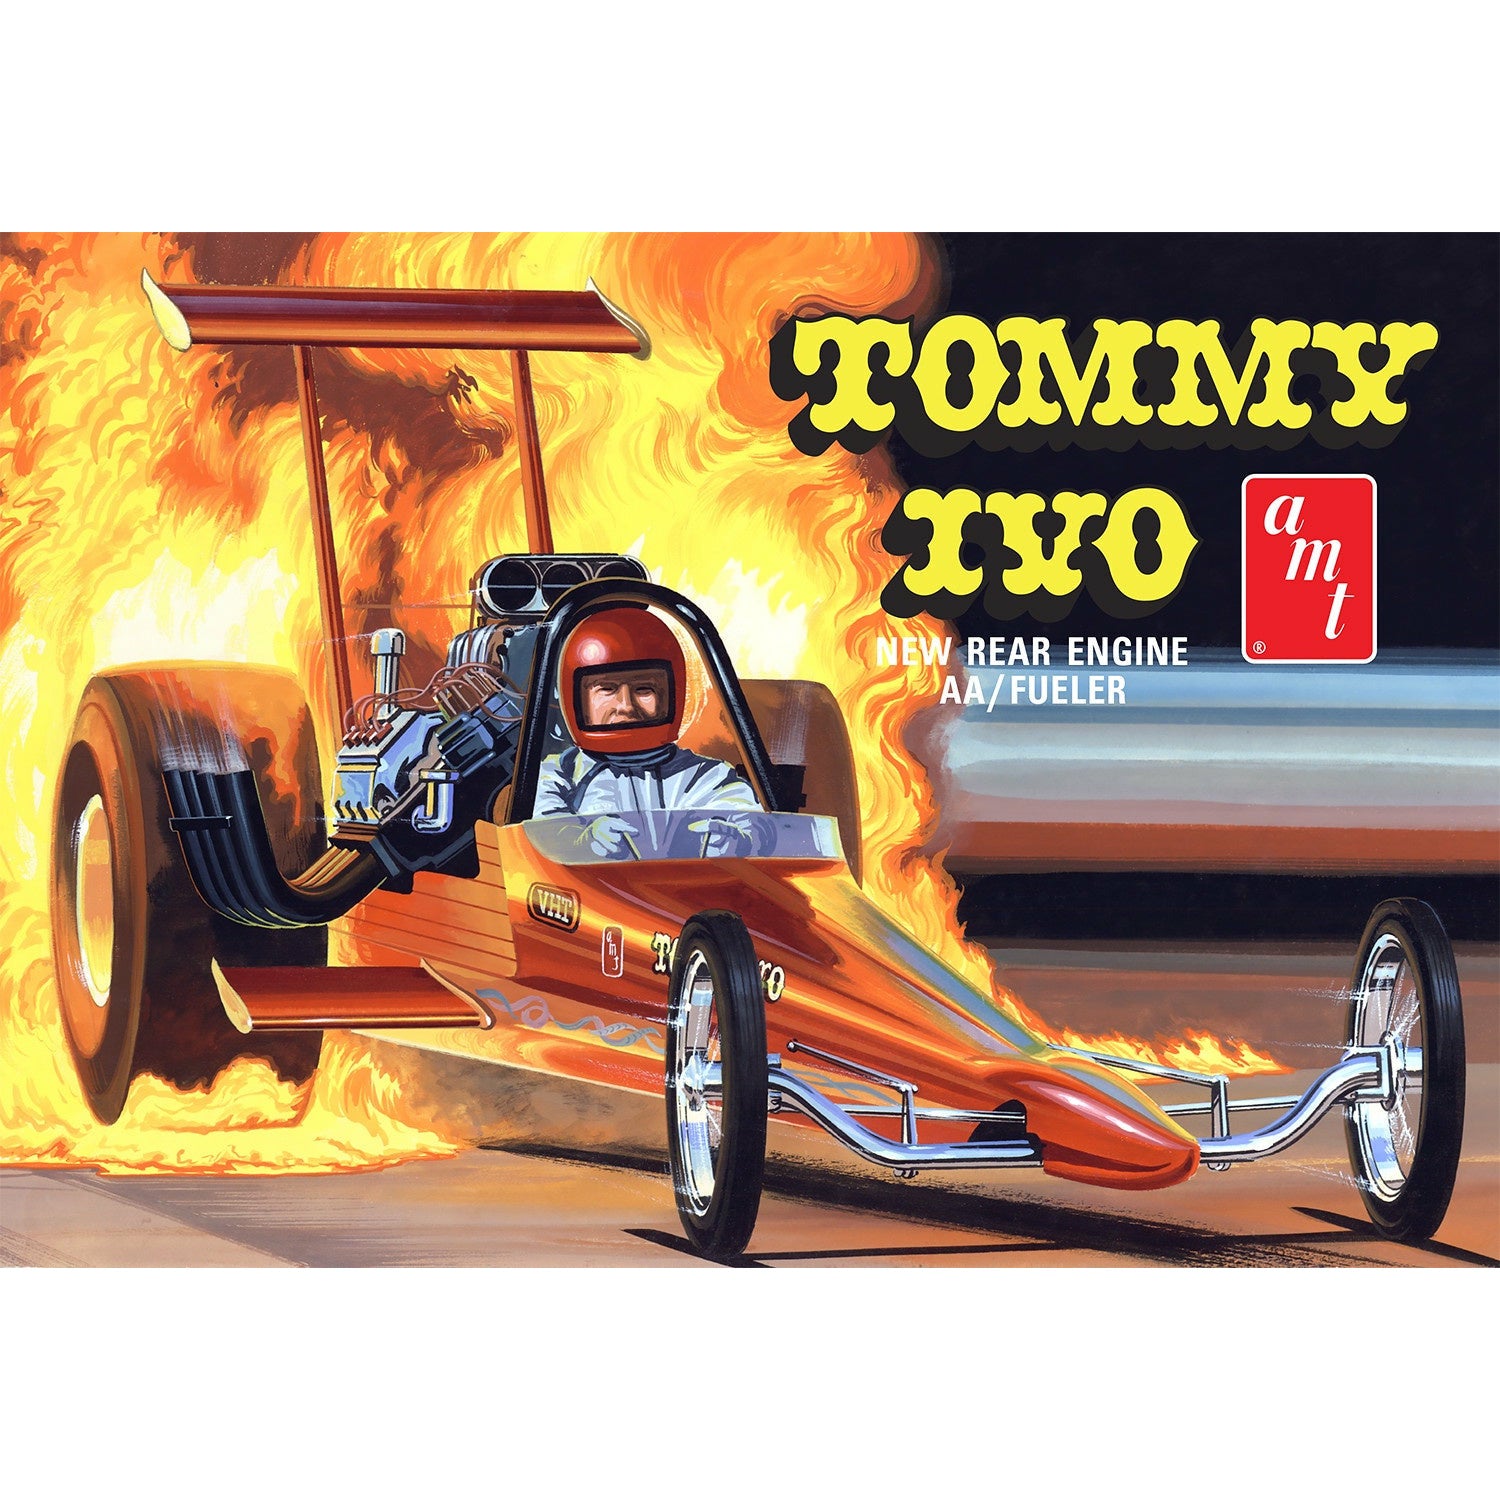 Tommy Ivo Rear Engine Dragster 1/25 Model Car Kit #1253 by AMT